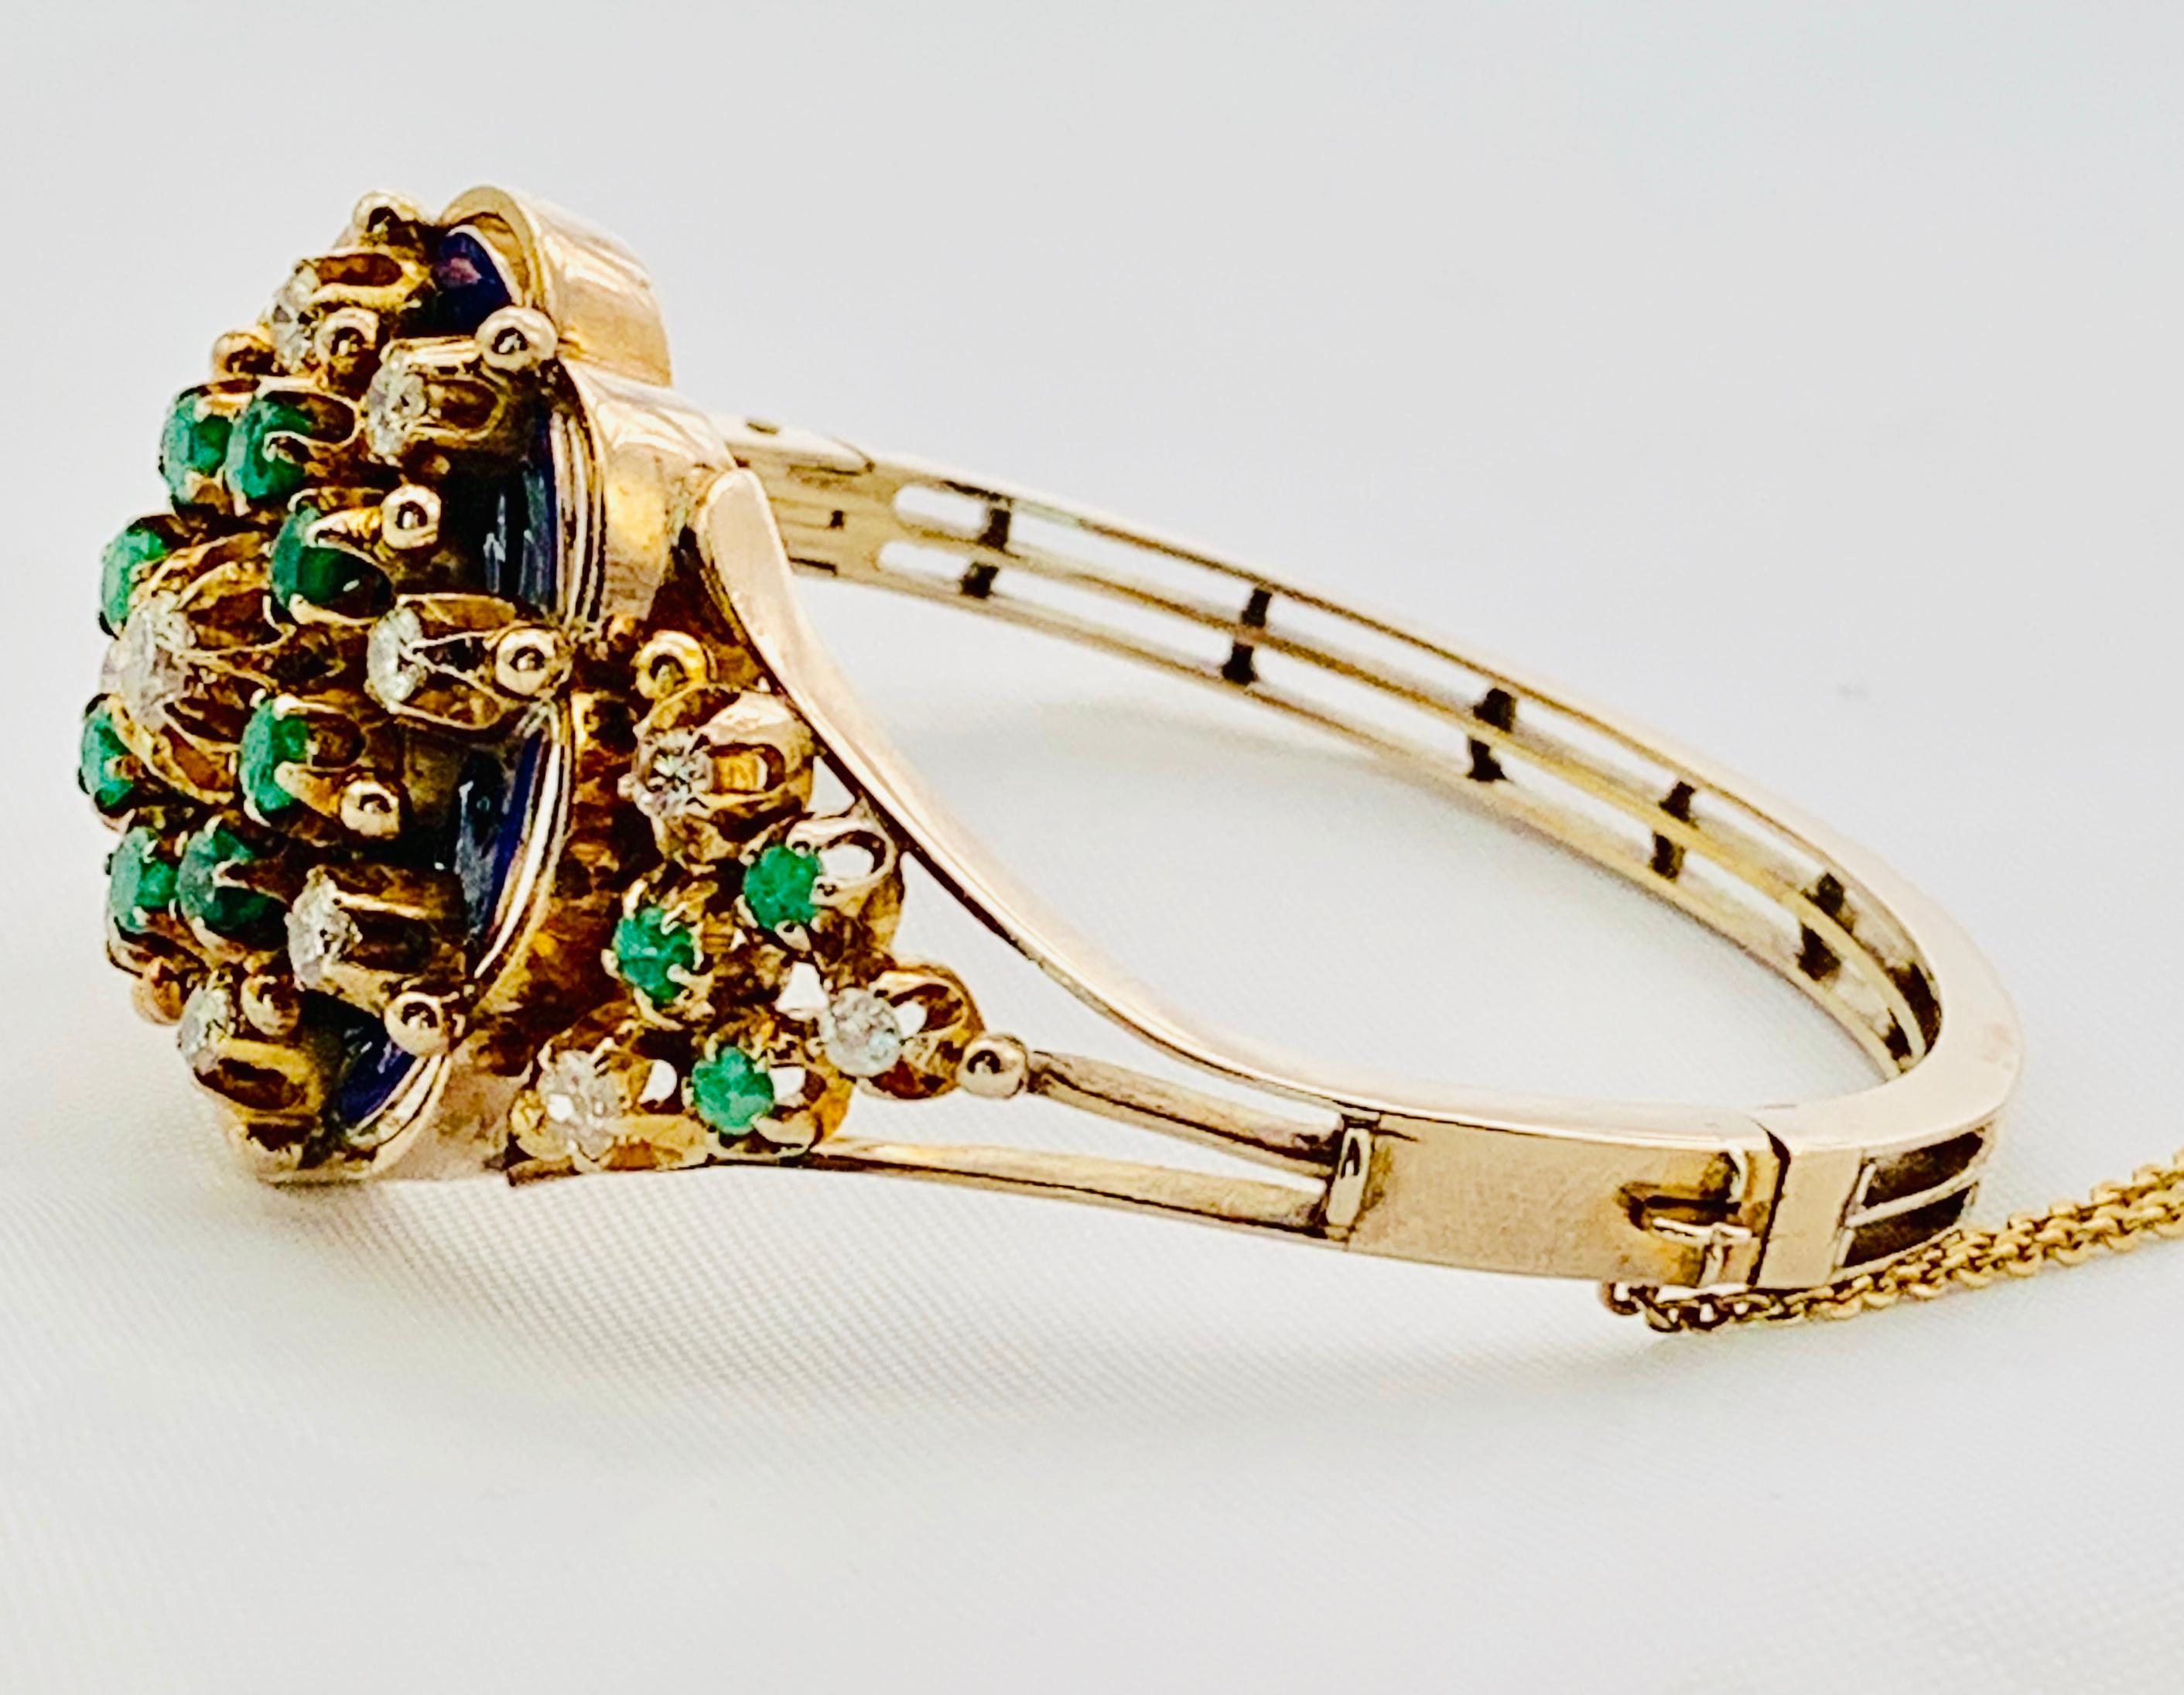 Gorgeous Vintage Bangle Bracelet! This piece is made in 10K Yellow Gold and has a Show Stopping 1.5 inch in diameter Center. Dating from the 1960's or 1970's, this colorful piece features 15 round diamonds and 14 Emeralds that are artfully Accented